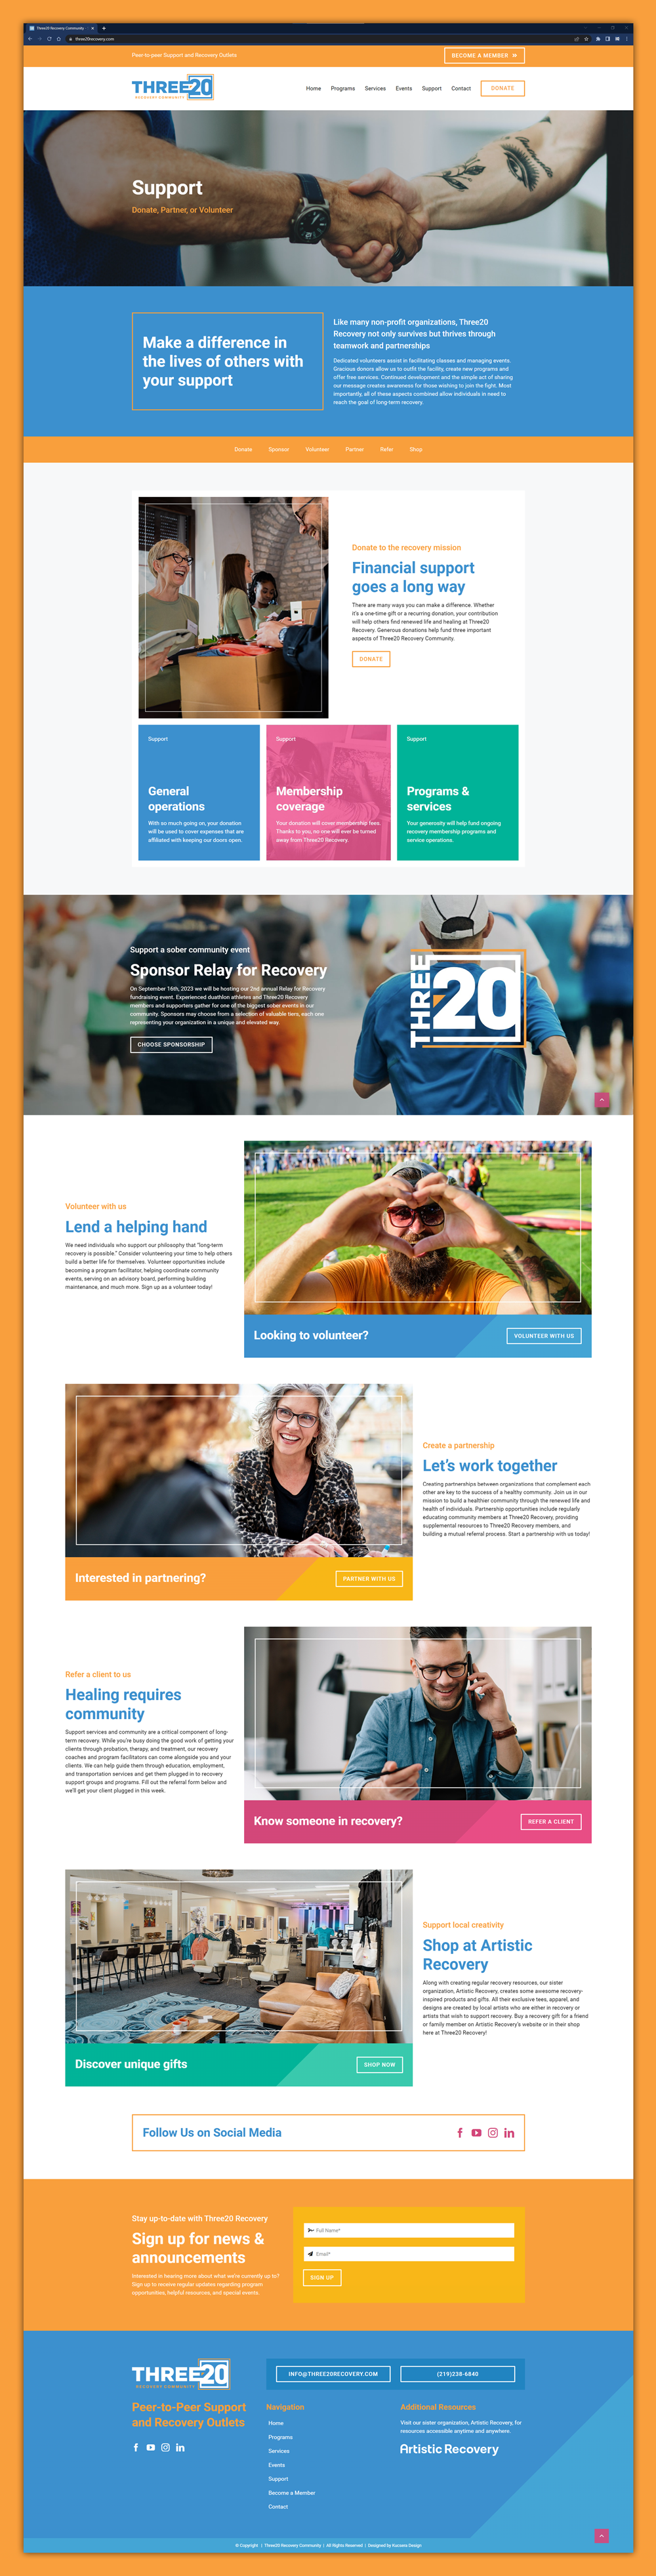 Three20 Recovery Community website design for support page